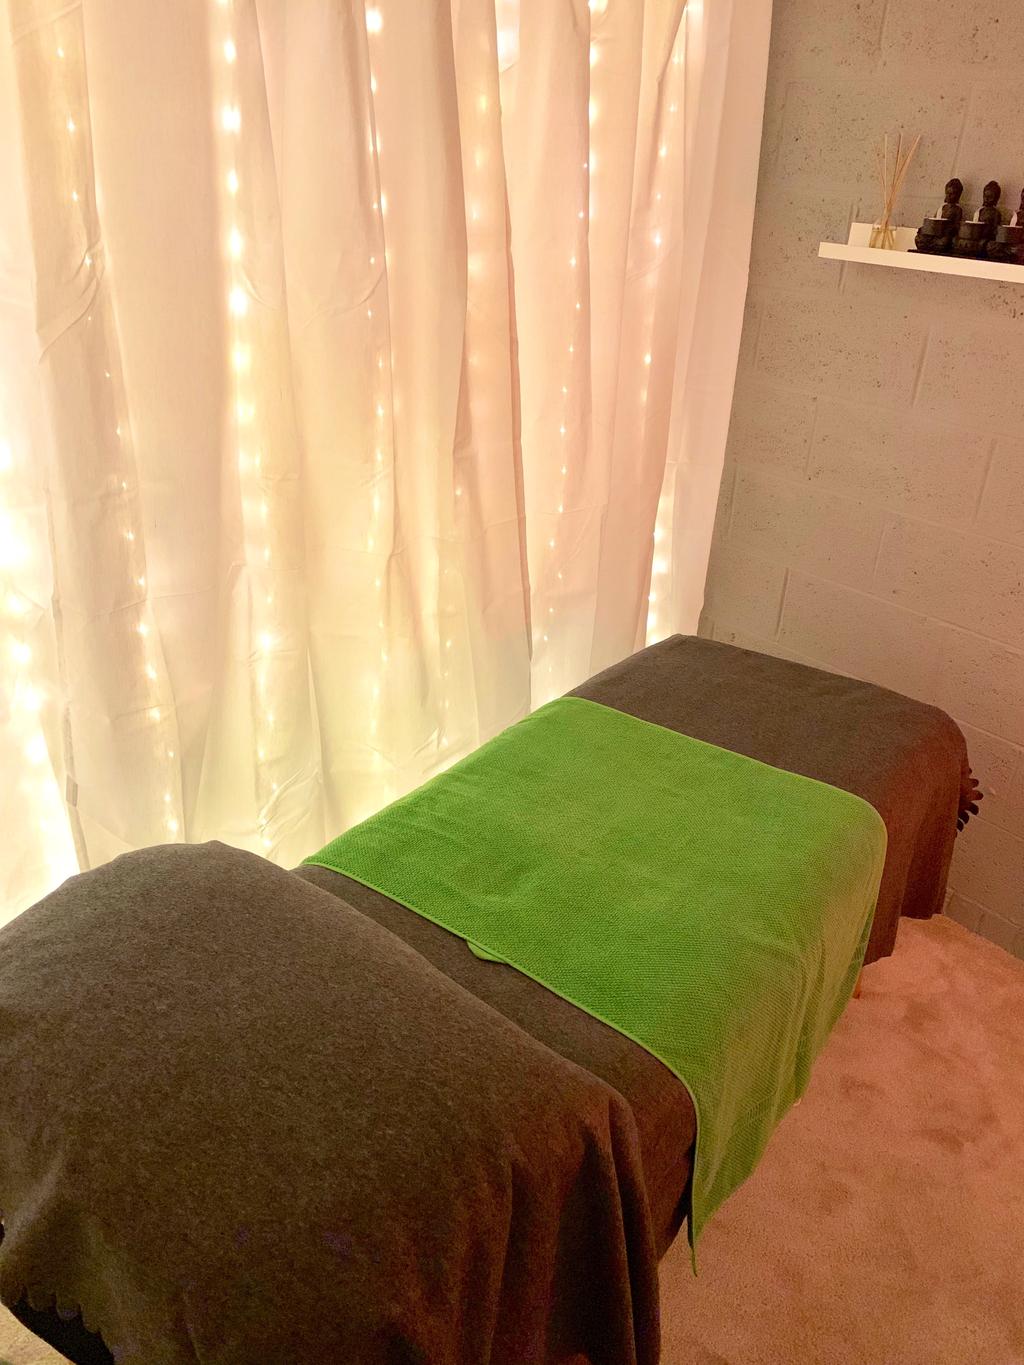 Experienced Reiki healer - over 20 years experience Reiki Master / Teacher - Client attunement s available Fully insured - ABT insurance Daytime, evening and weekend appointments